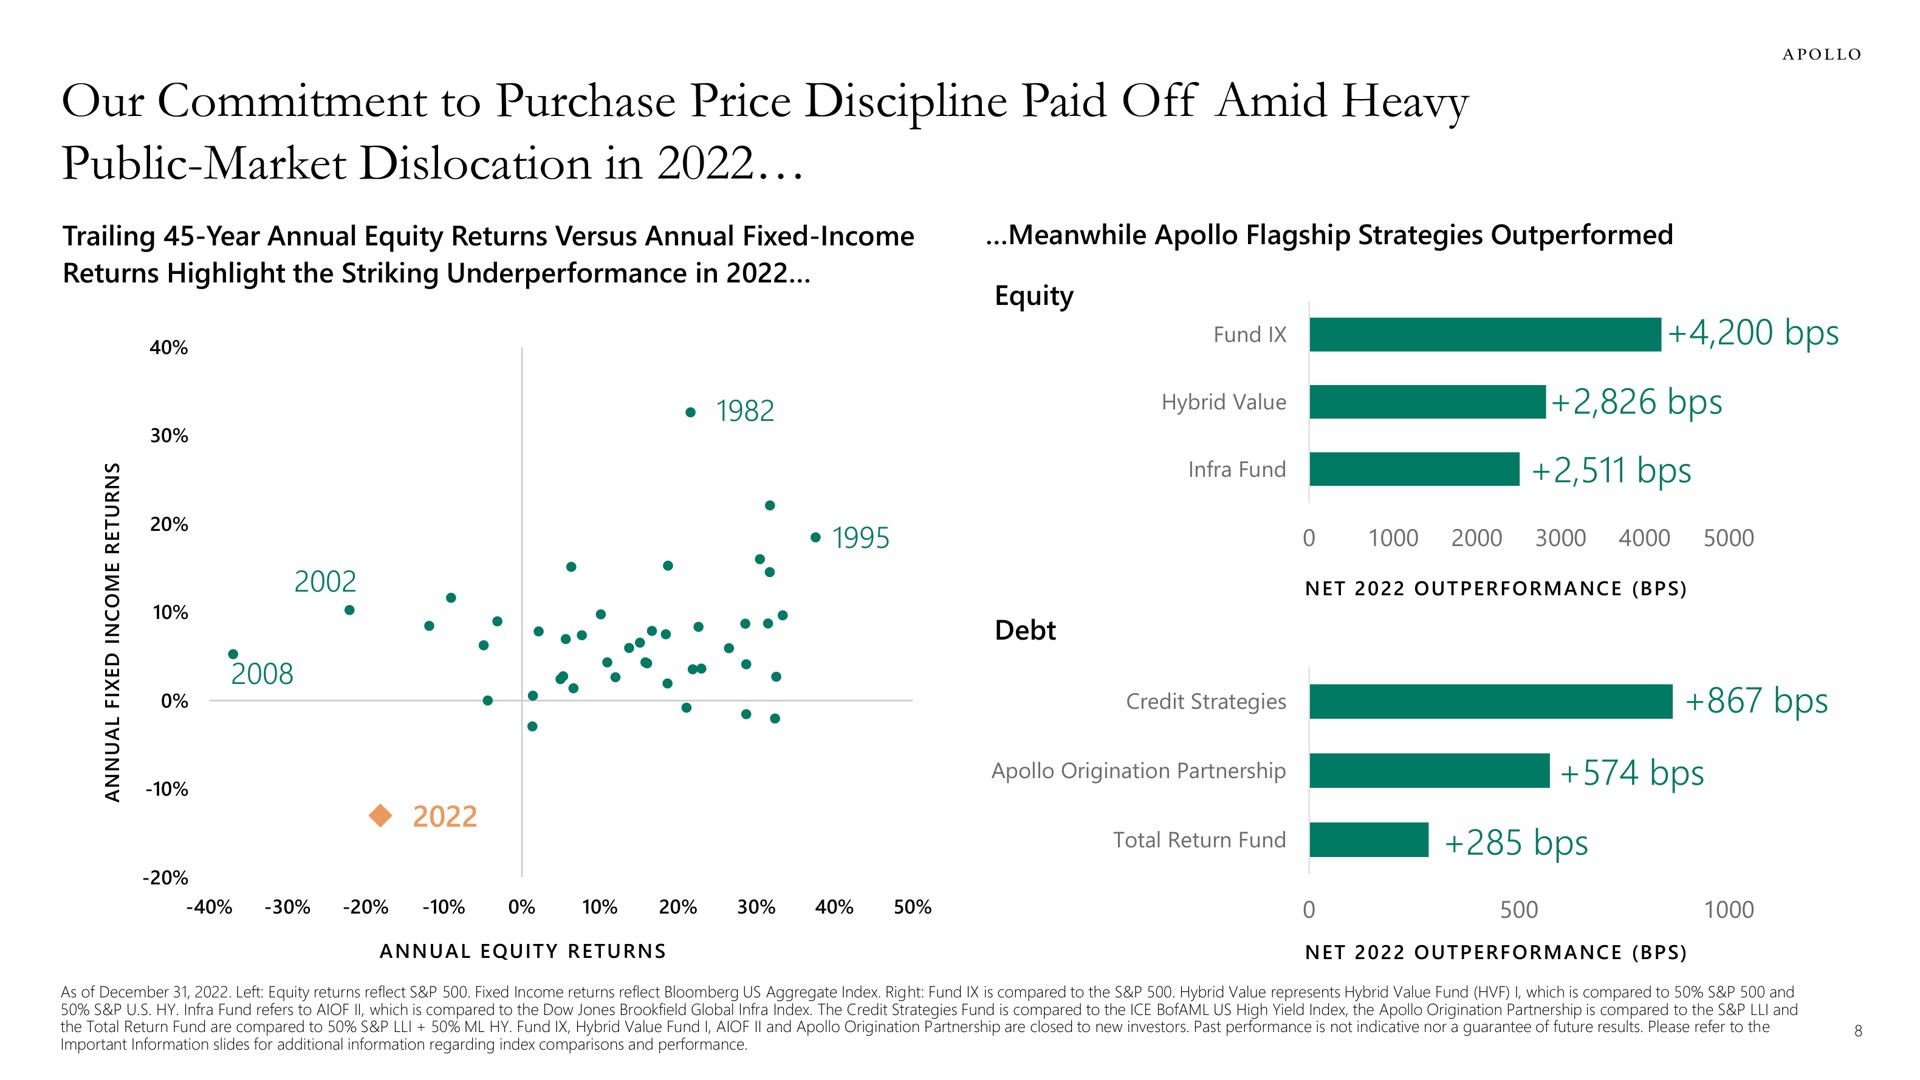 our commitment to purchase price discipline paid off amid heavy public market dislocation in fund i hybrid value credit strategies | Apollo Global Management